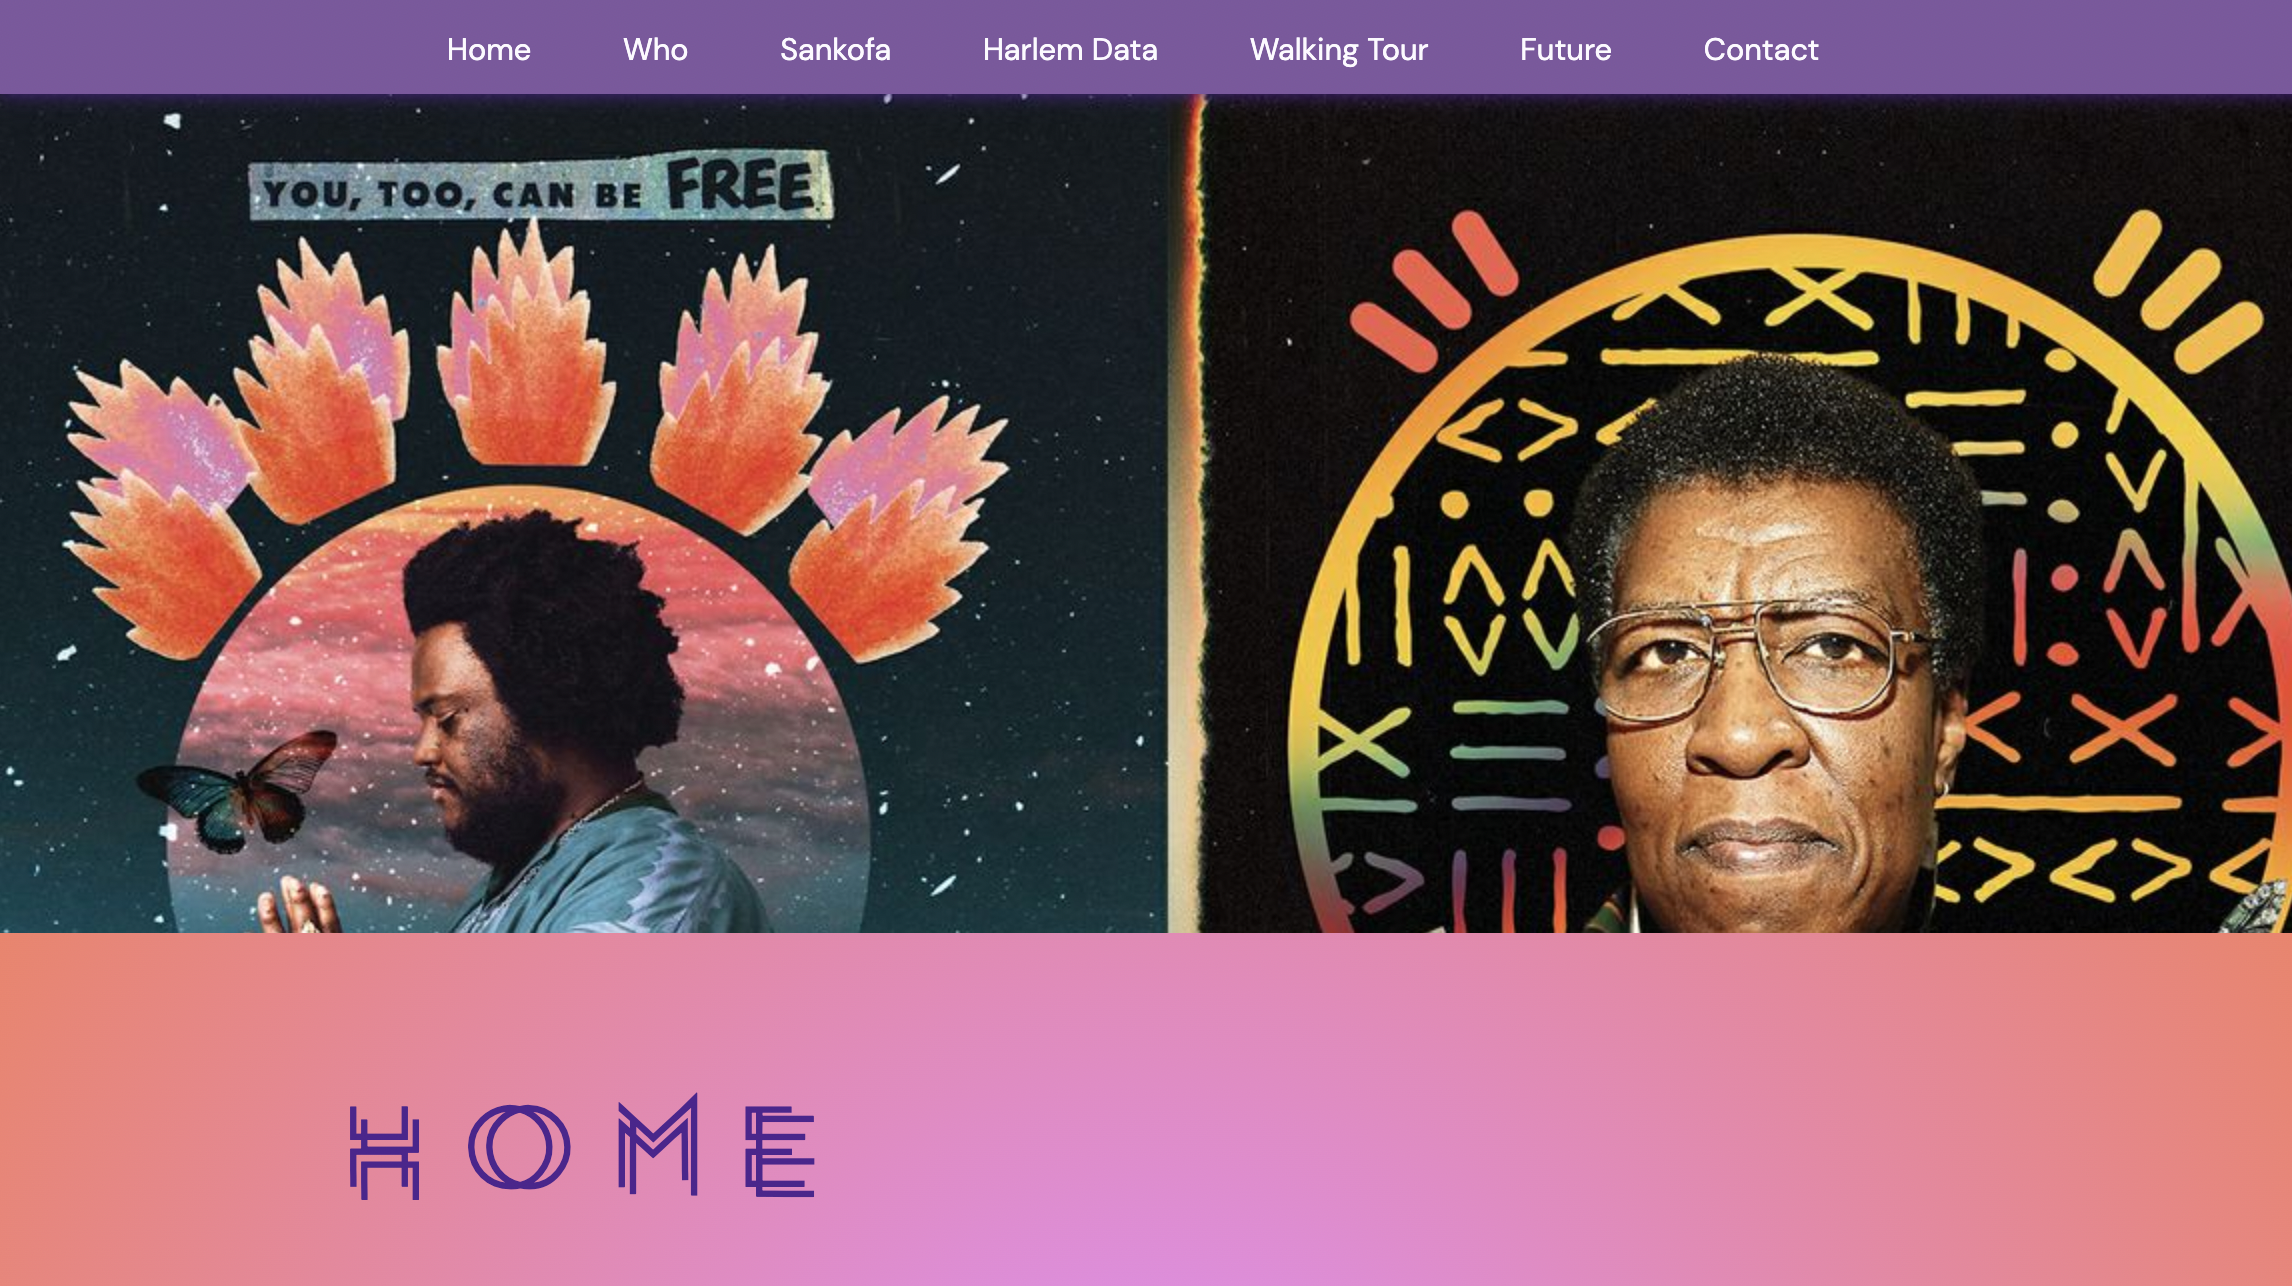 a pink and purple background with the word "home" portraits of two Black folks are centered. One faces to the left and one faces head on. their heads are surrounded by colorful symbols